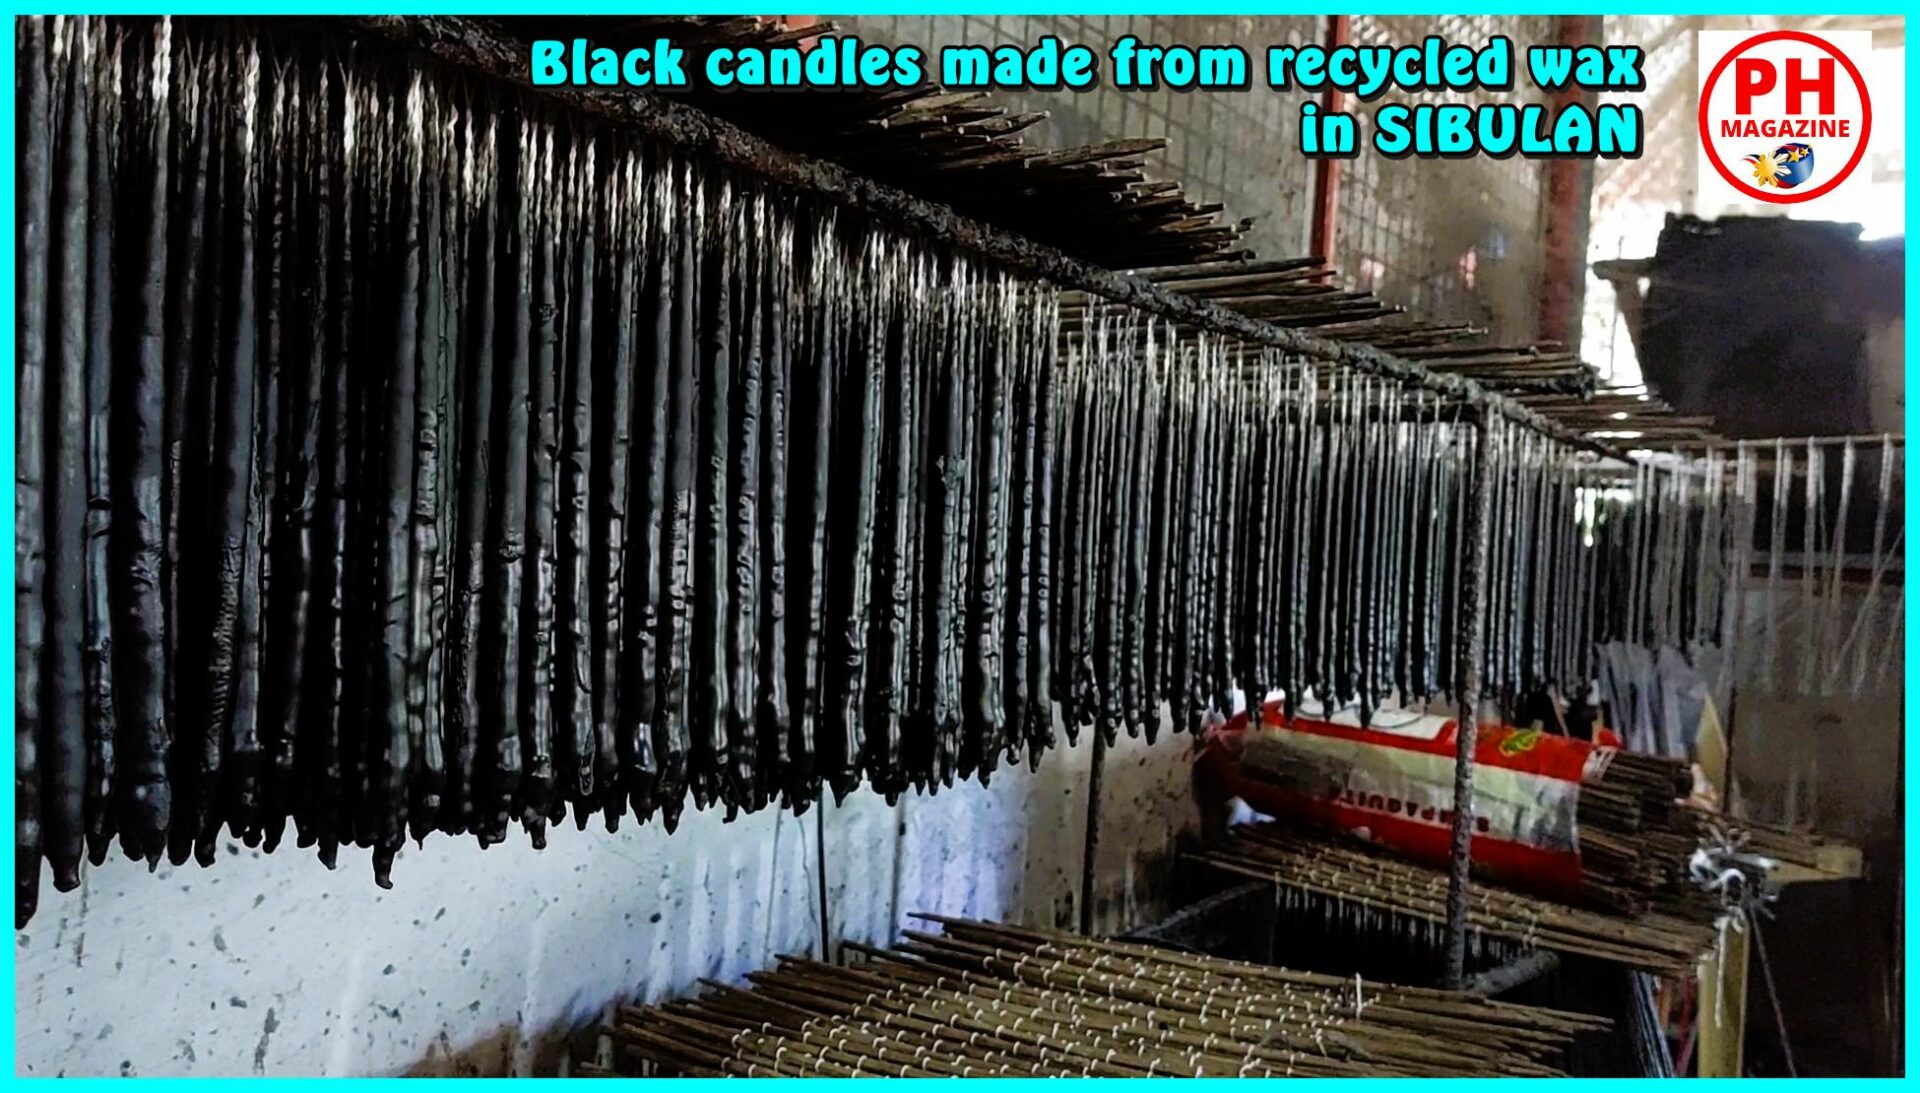 SIGHTS OF NEGROS - PHTO OF THE DAY - Black candles made from recycled wax in Sibulan